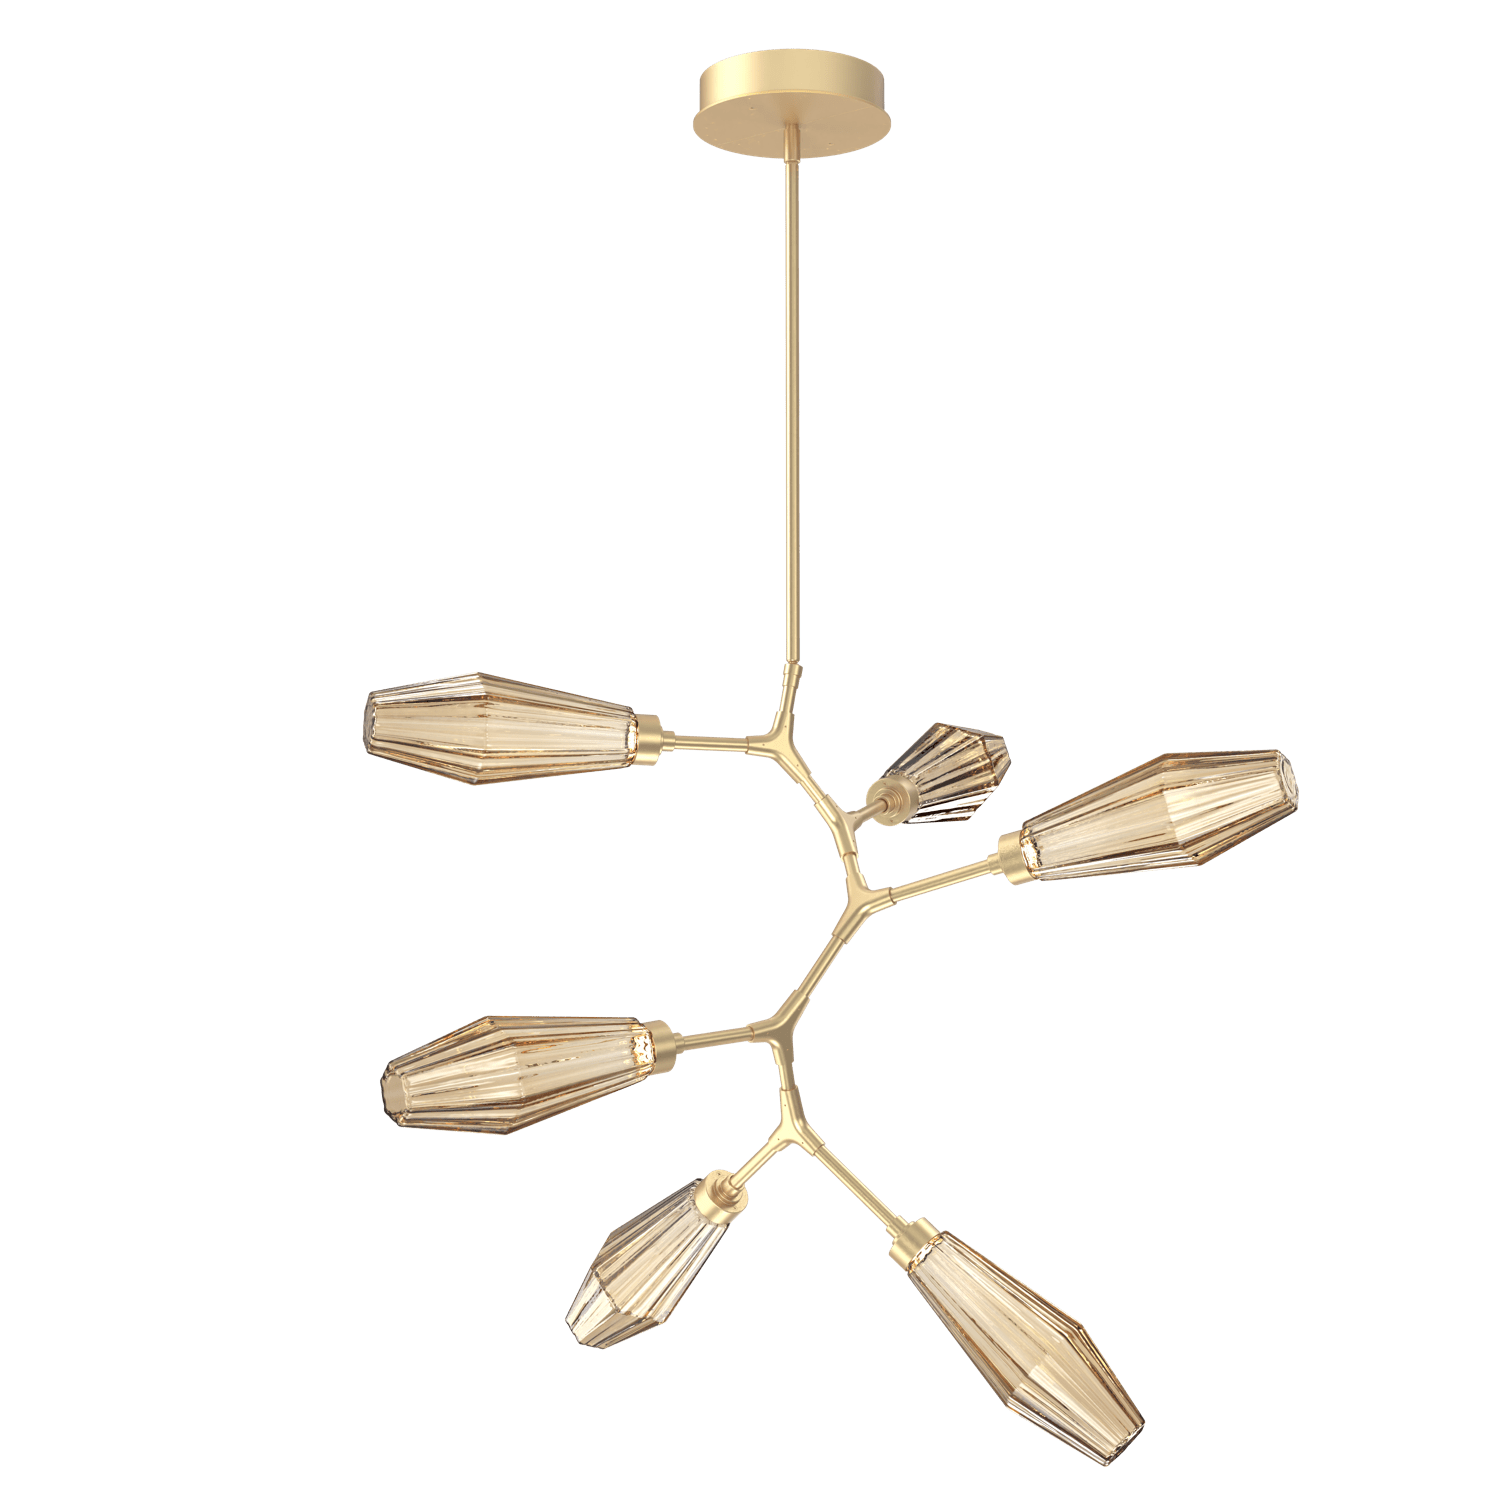 CHB0049-VA-GB-RB-Hammerton-Studio-Aalto-6-light-modern-vine-chandelier-with-gilded-brass-finish-and-optic-ribbed-bronze-glass-shades-and-LED-lamping